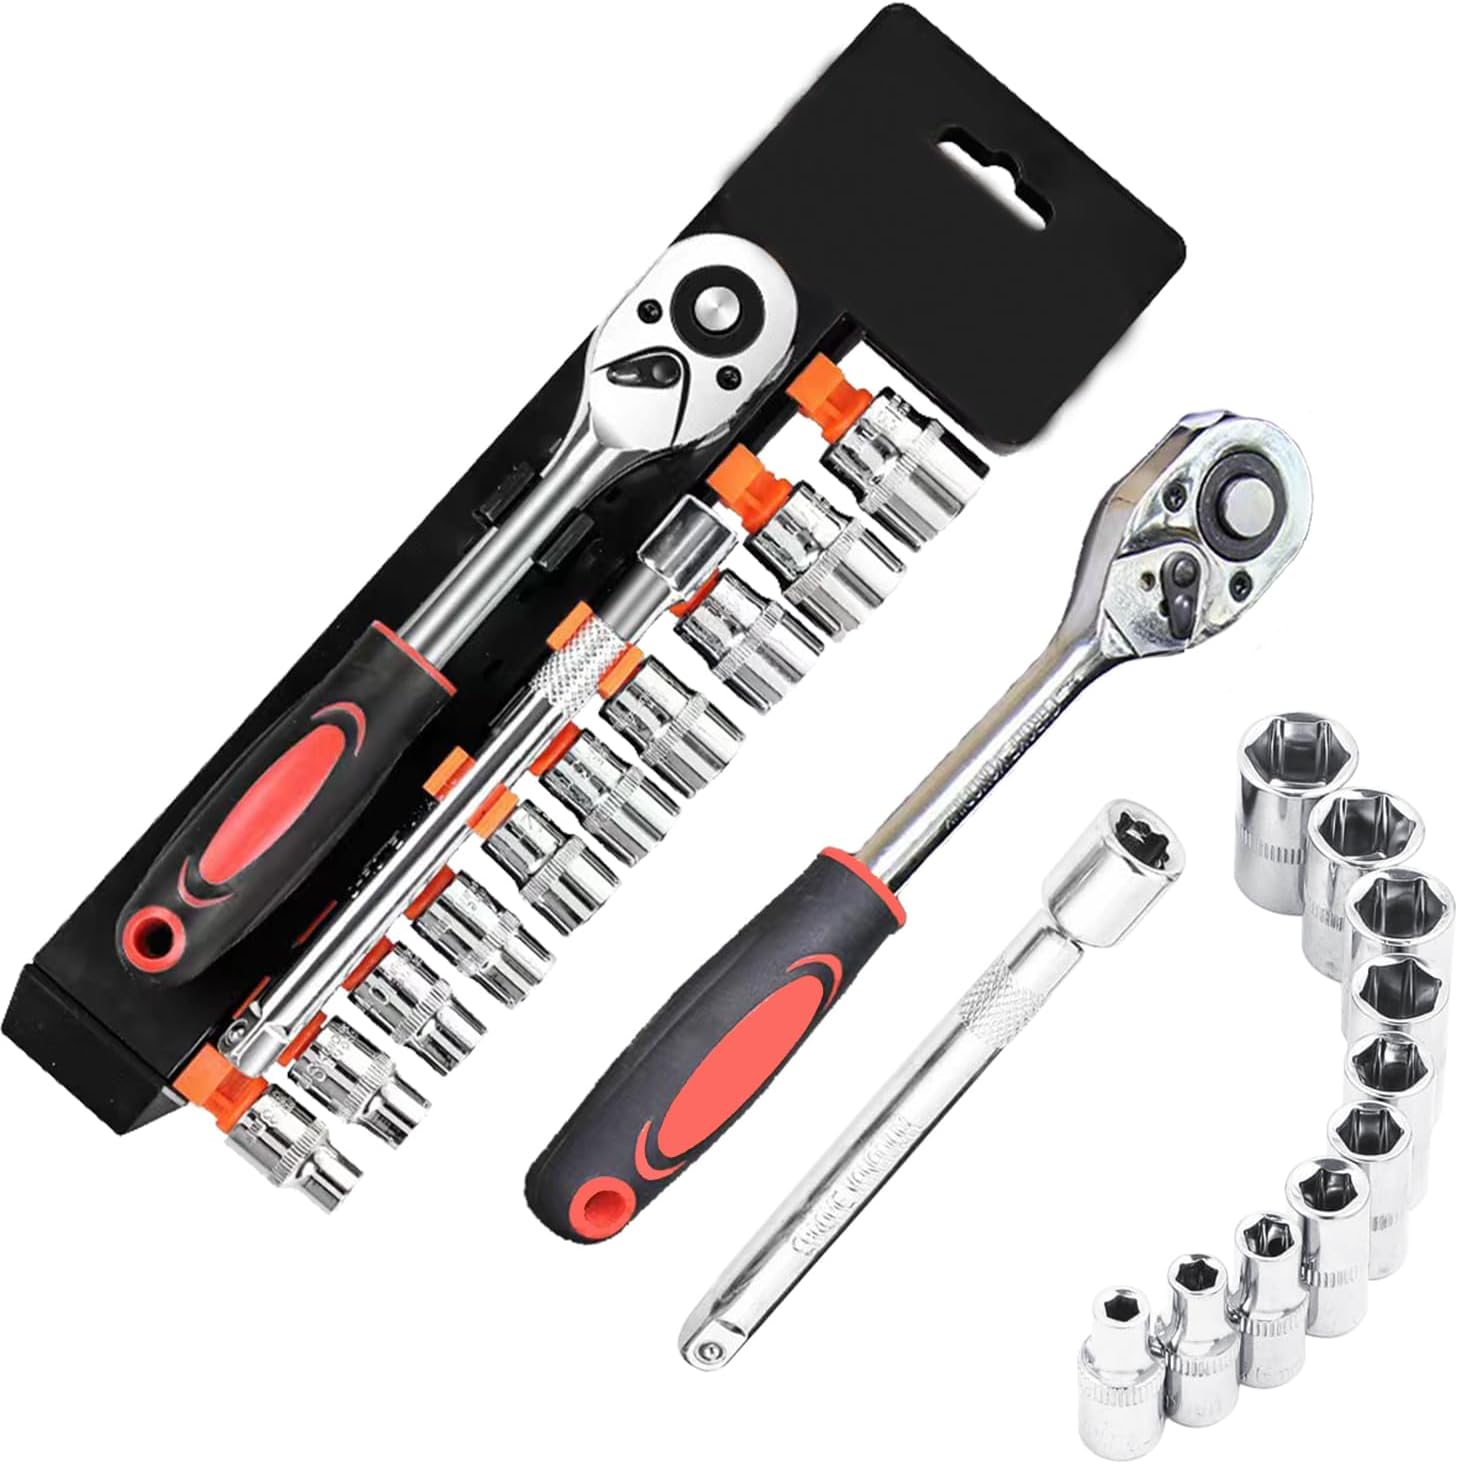 12pcs Socket Wrench Set with 1/4in Drive for Cars/Bike/Cycle